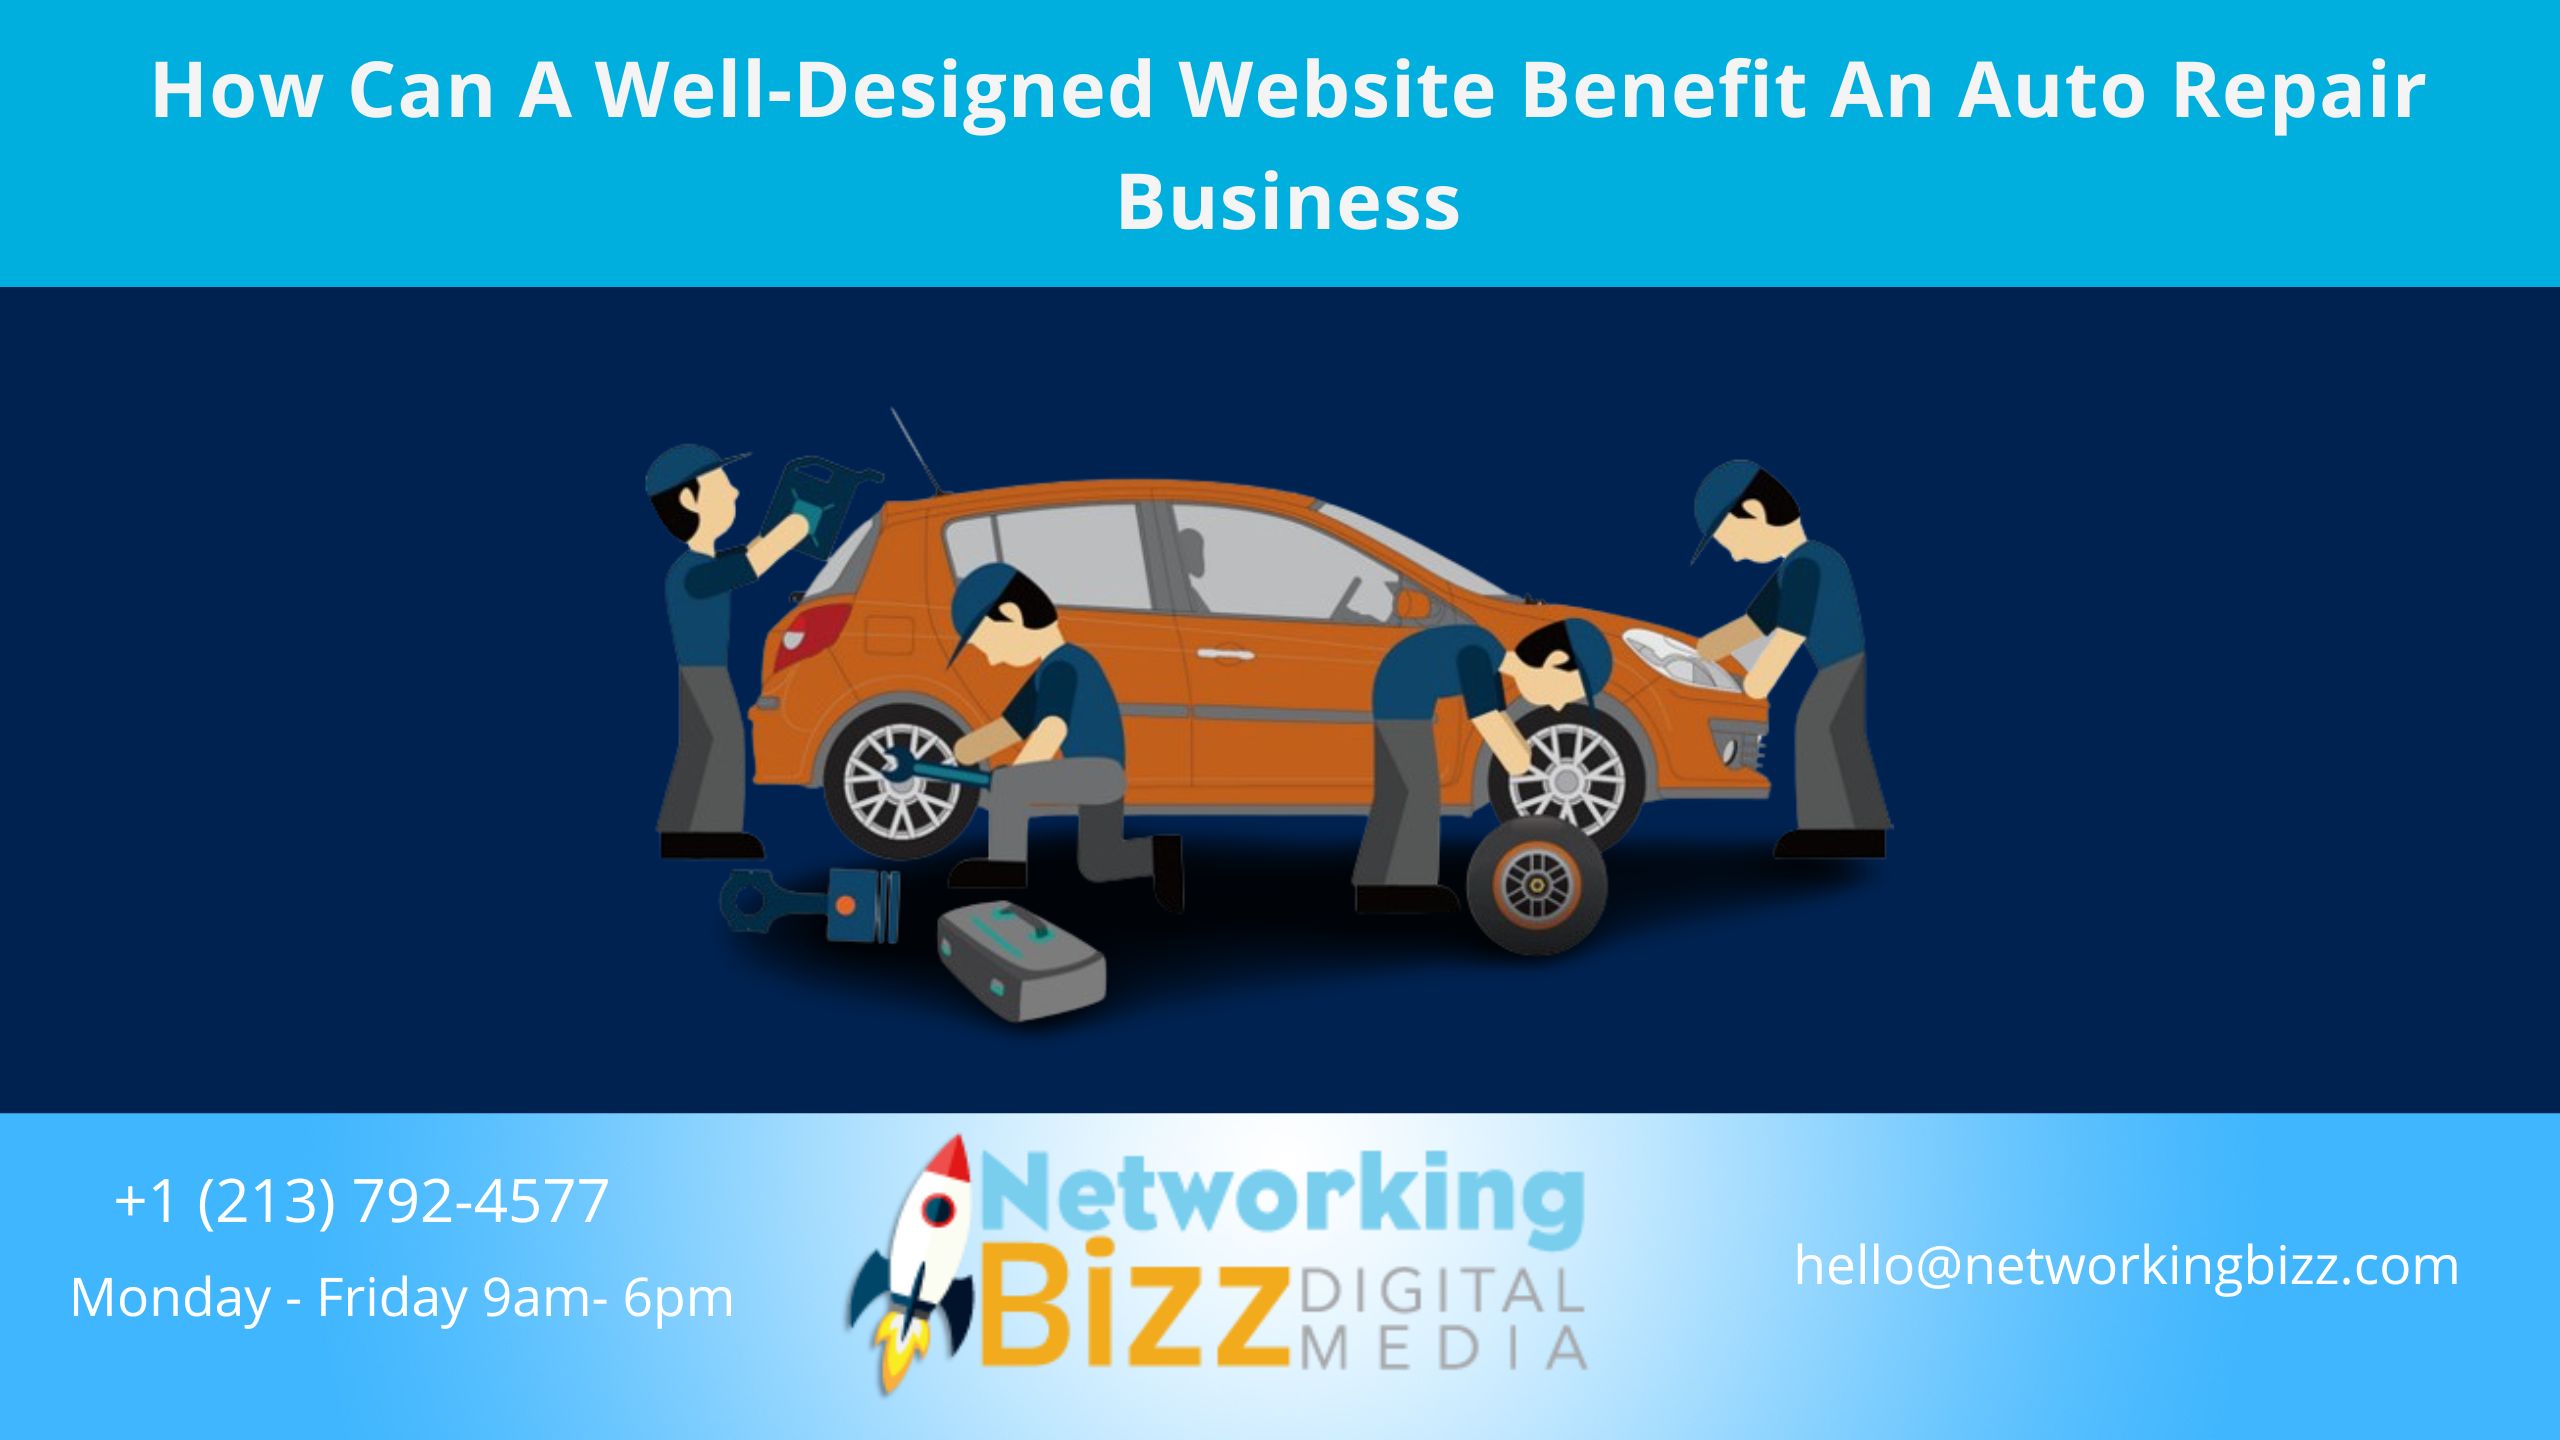 How Can A Well-Designed Website Benefit An Auto Repair Business